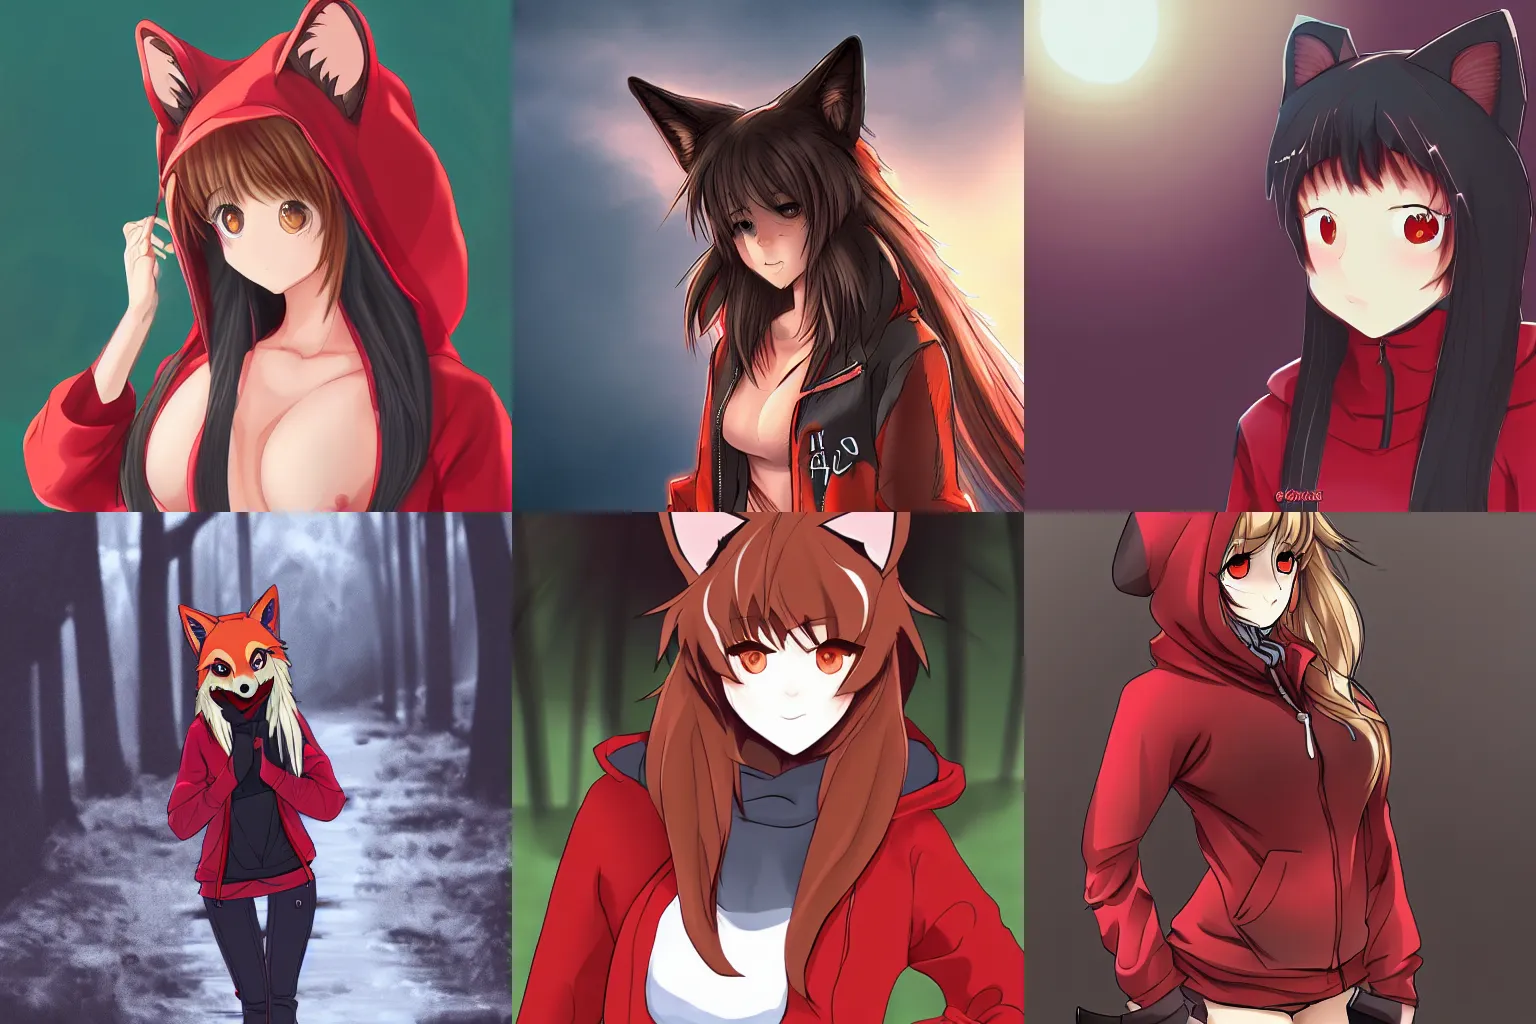 Anime Wolf Girl Pics Wallpapers - Wallpaper Cave